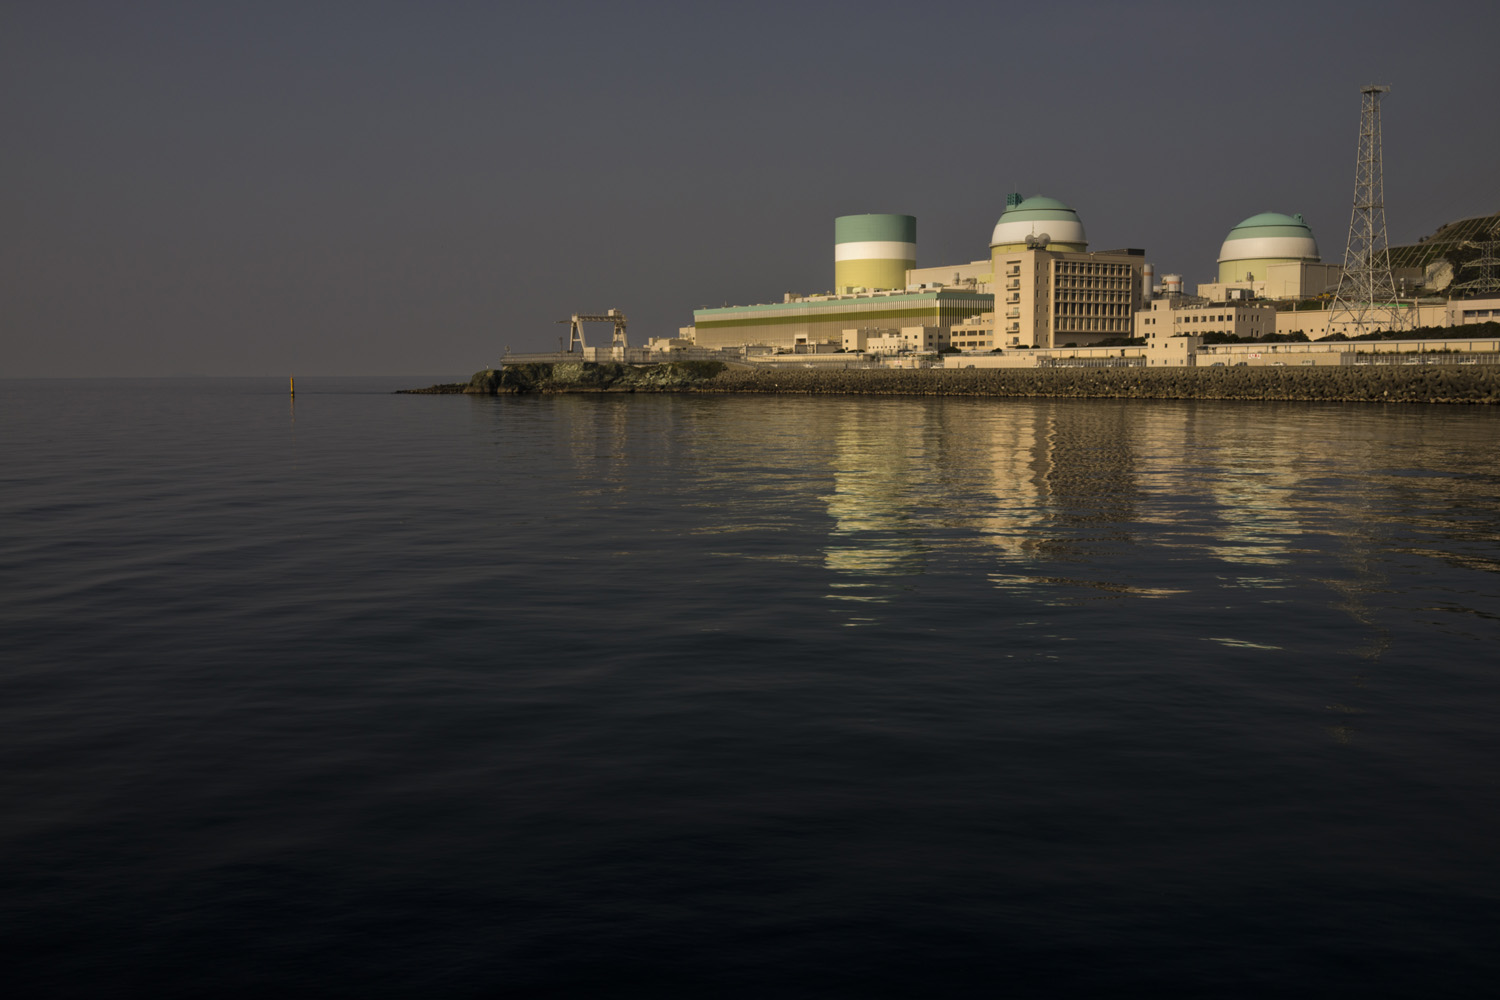 Japan, Ikata, 2014Ikata Nuclear Power Station by Shikoku electric Power Co. in the south of the country.